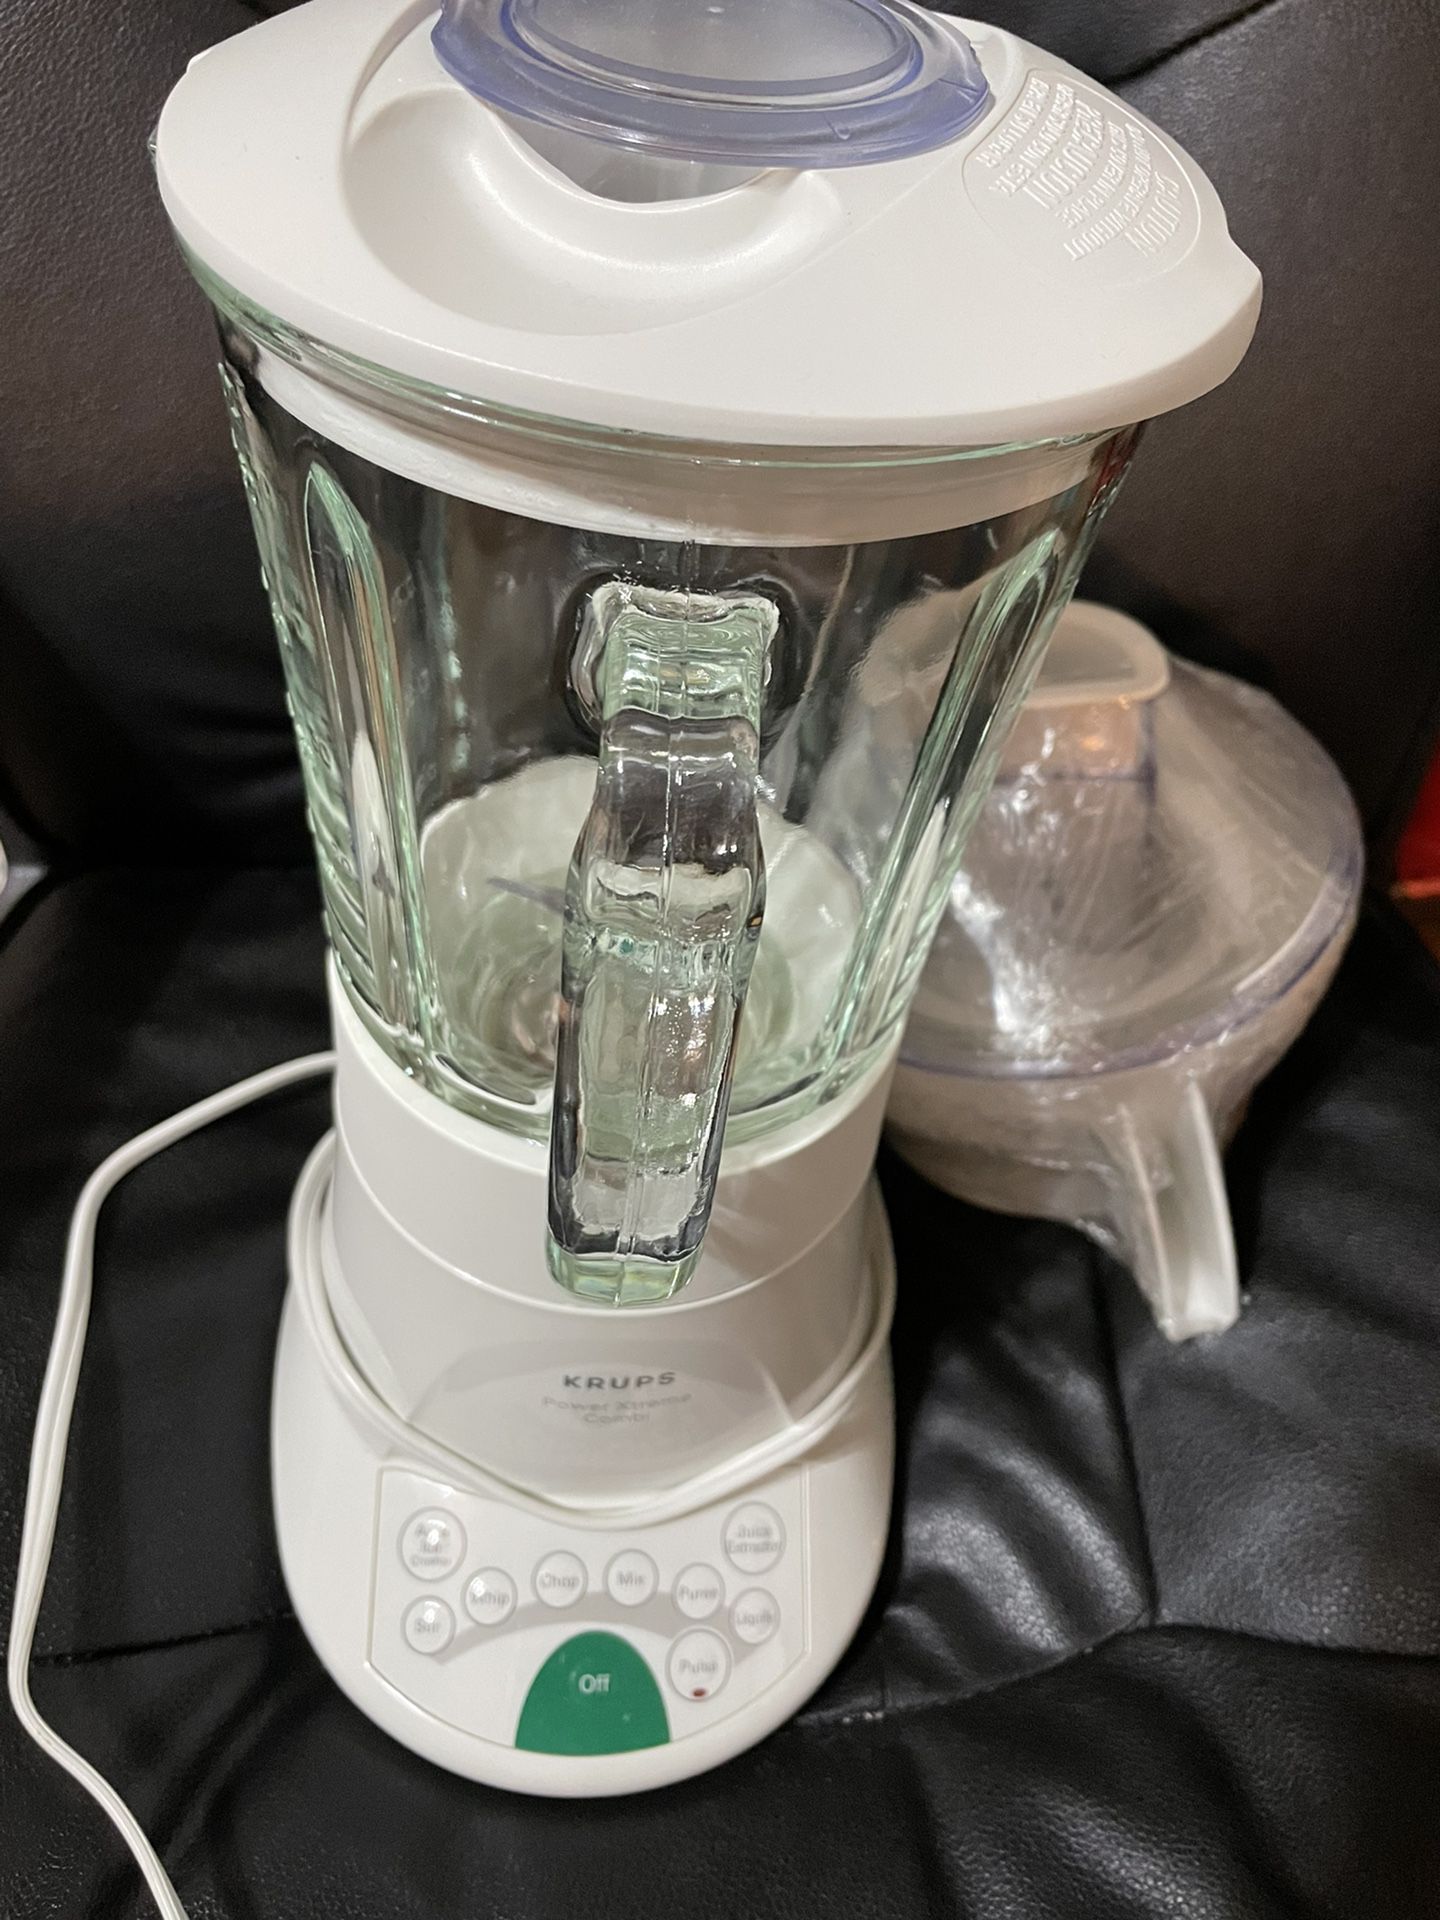 Cooks 5-in-1 Power Blender for Sale in Mount Prospect, IL - OfferUp